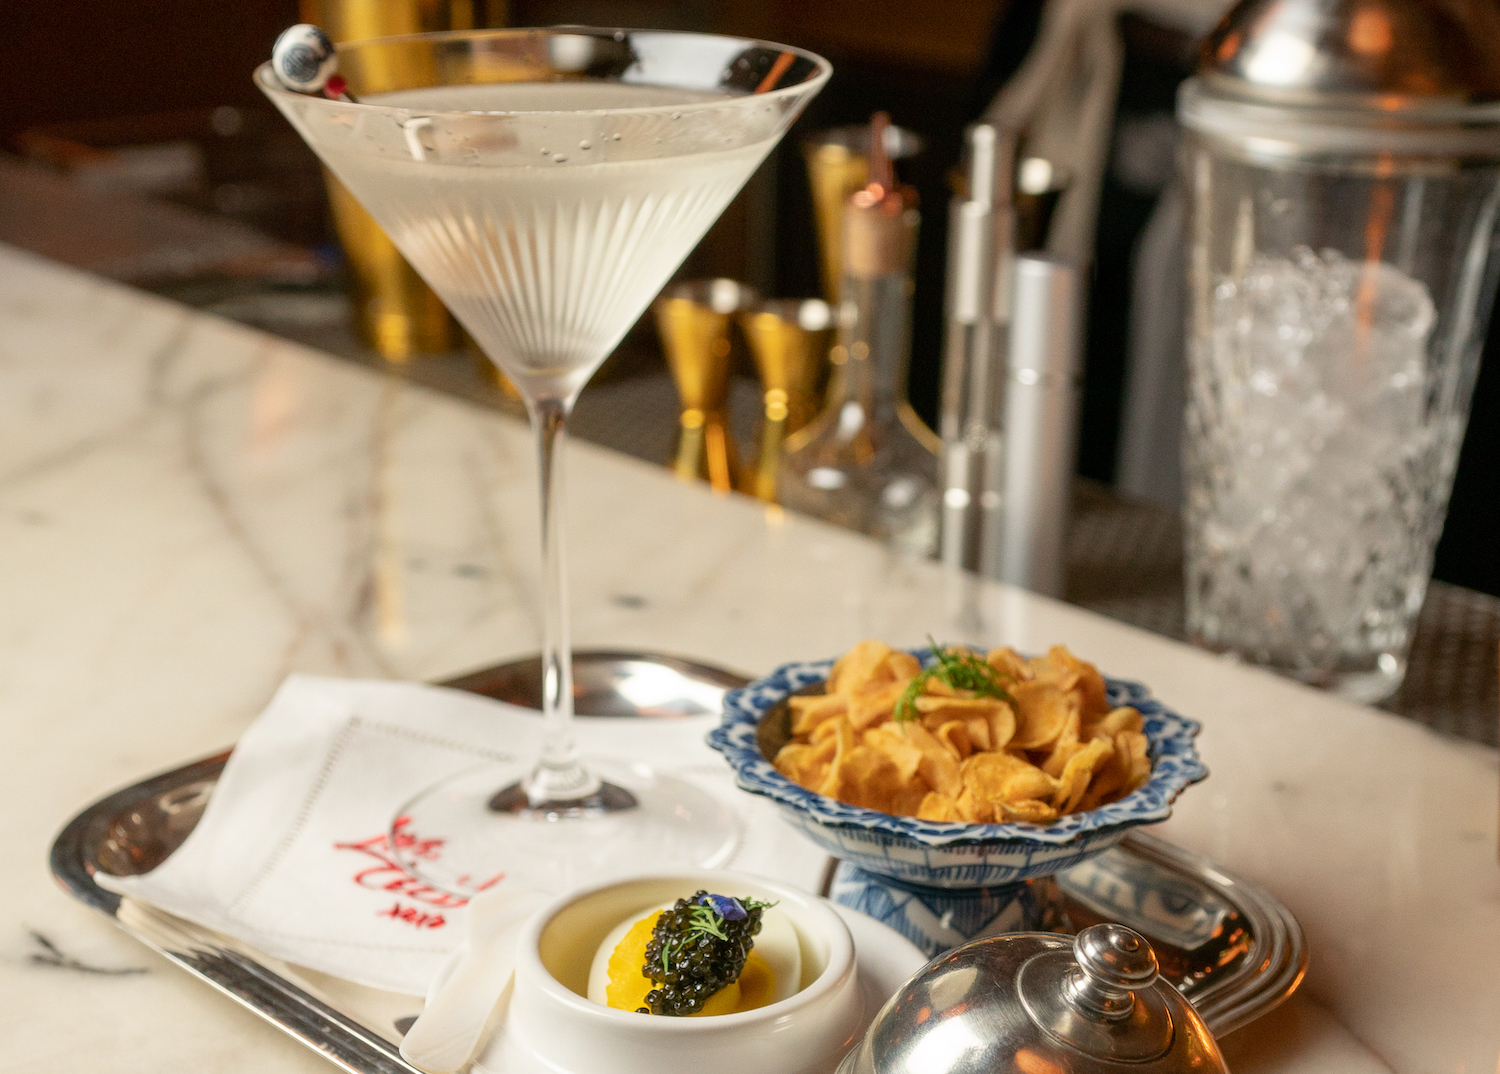 Bar Cecil's $50 martini, deviled egg topped with caviar and side of sunchoke chips